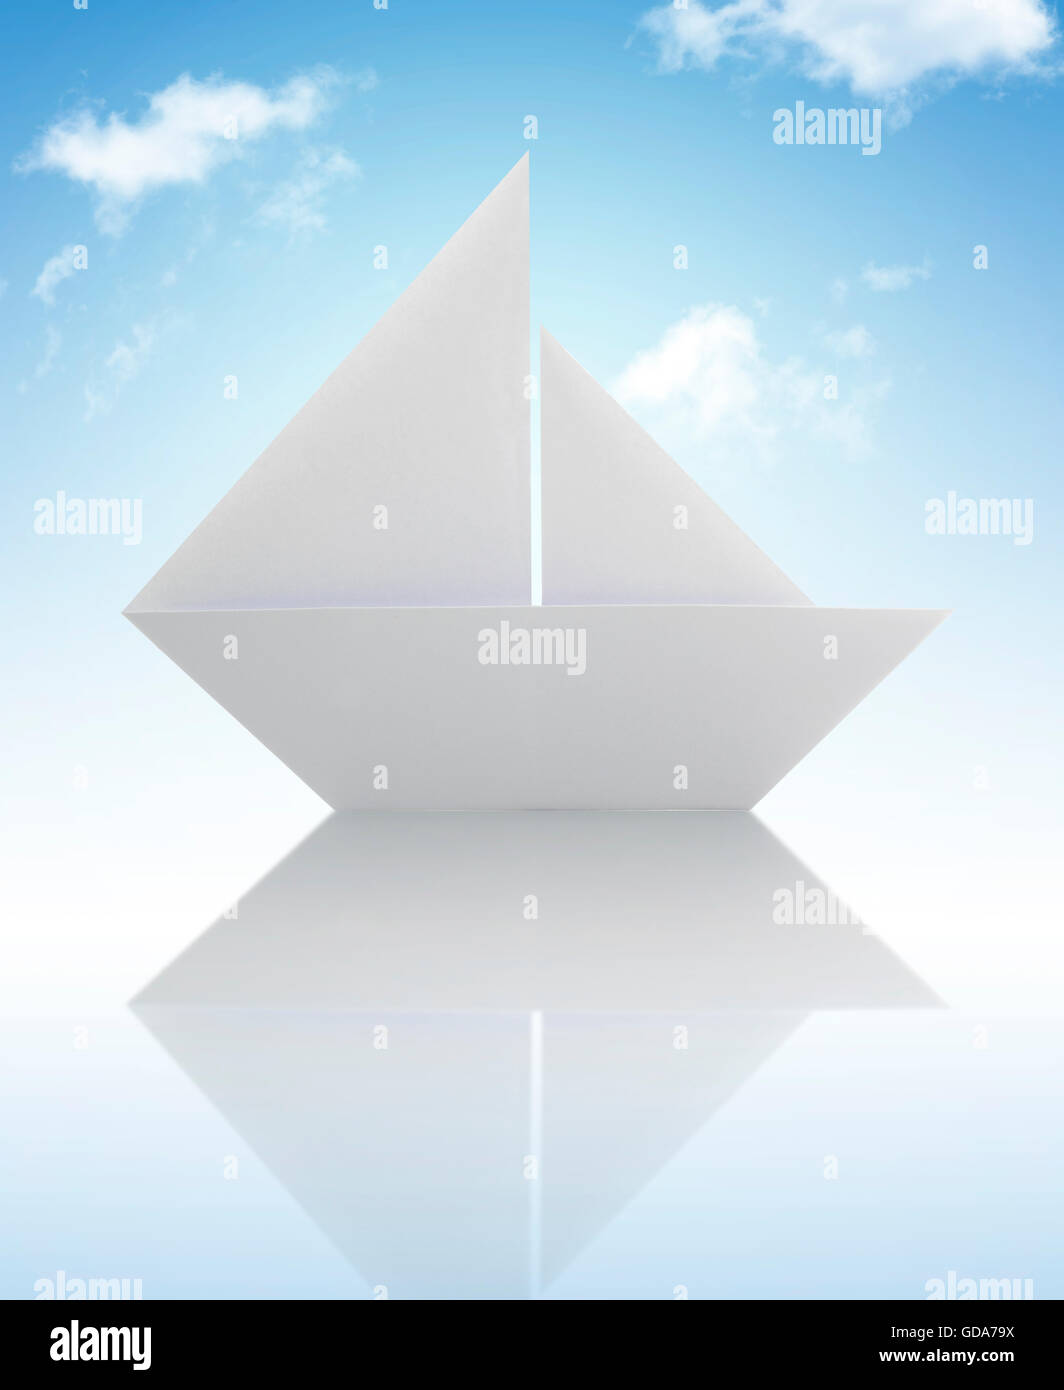 White Origami Paper Sailing Boat Under The Sky Stock Photo